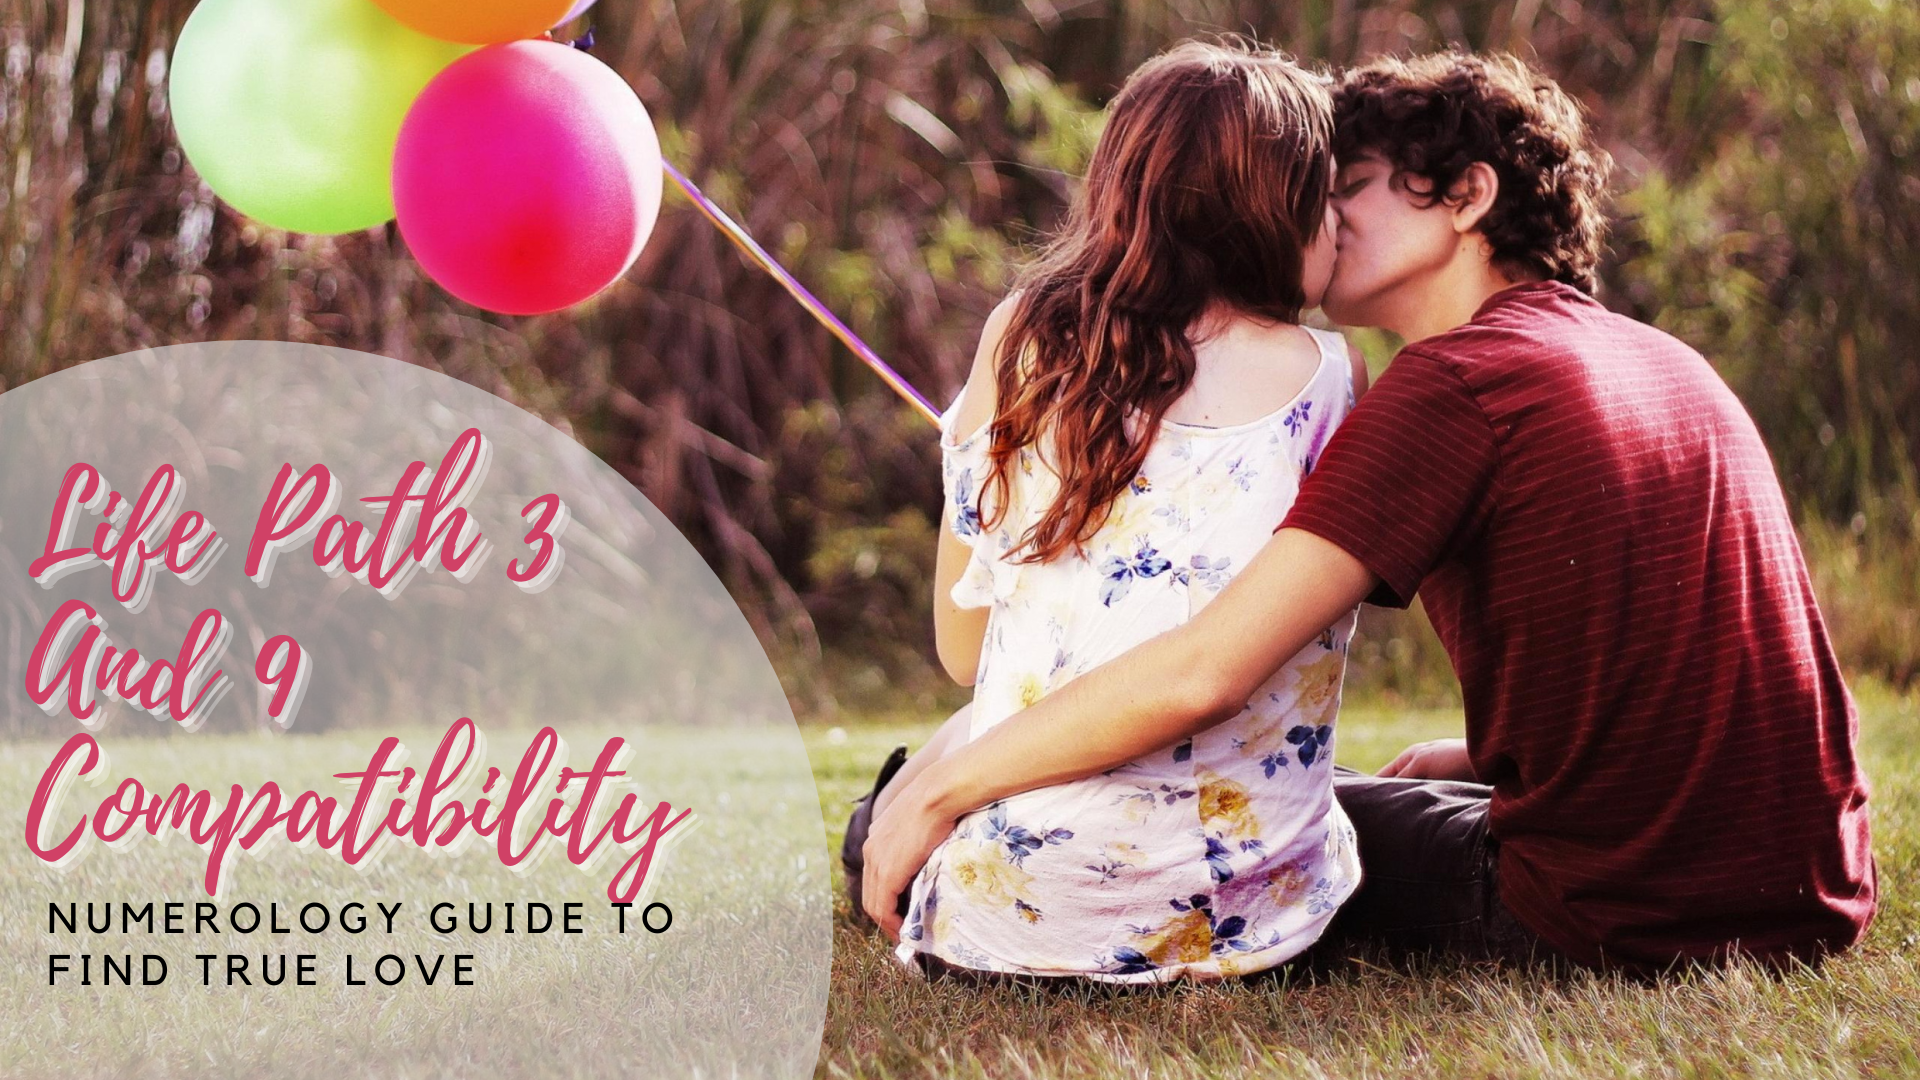 Life Path 3 And 9 Compatibility - Numerology Guide To Find True Love